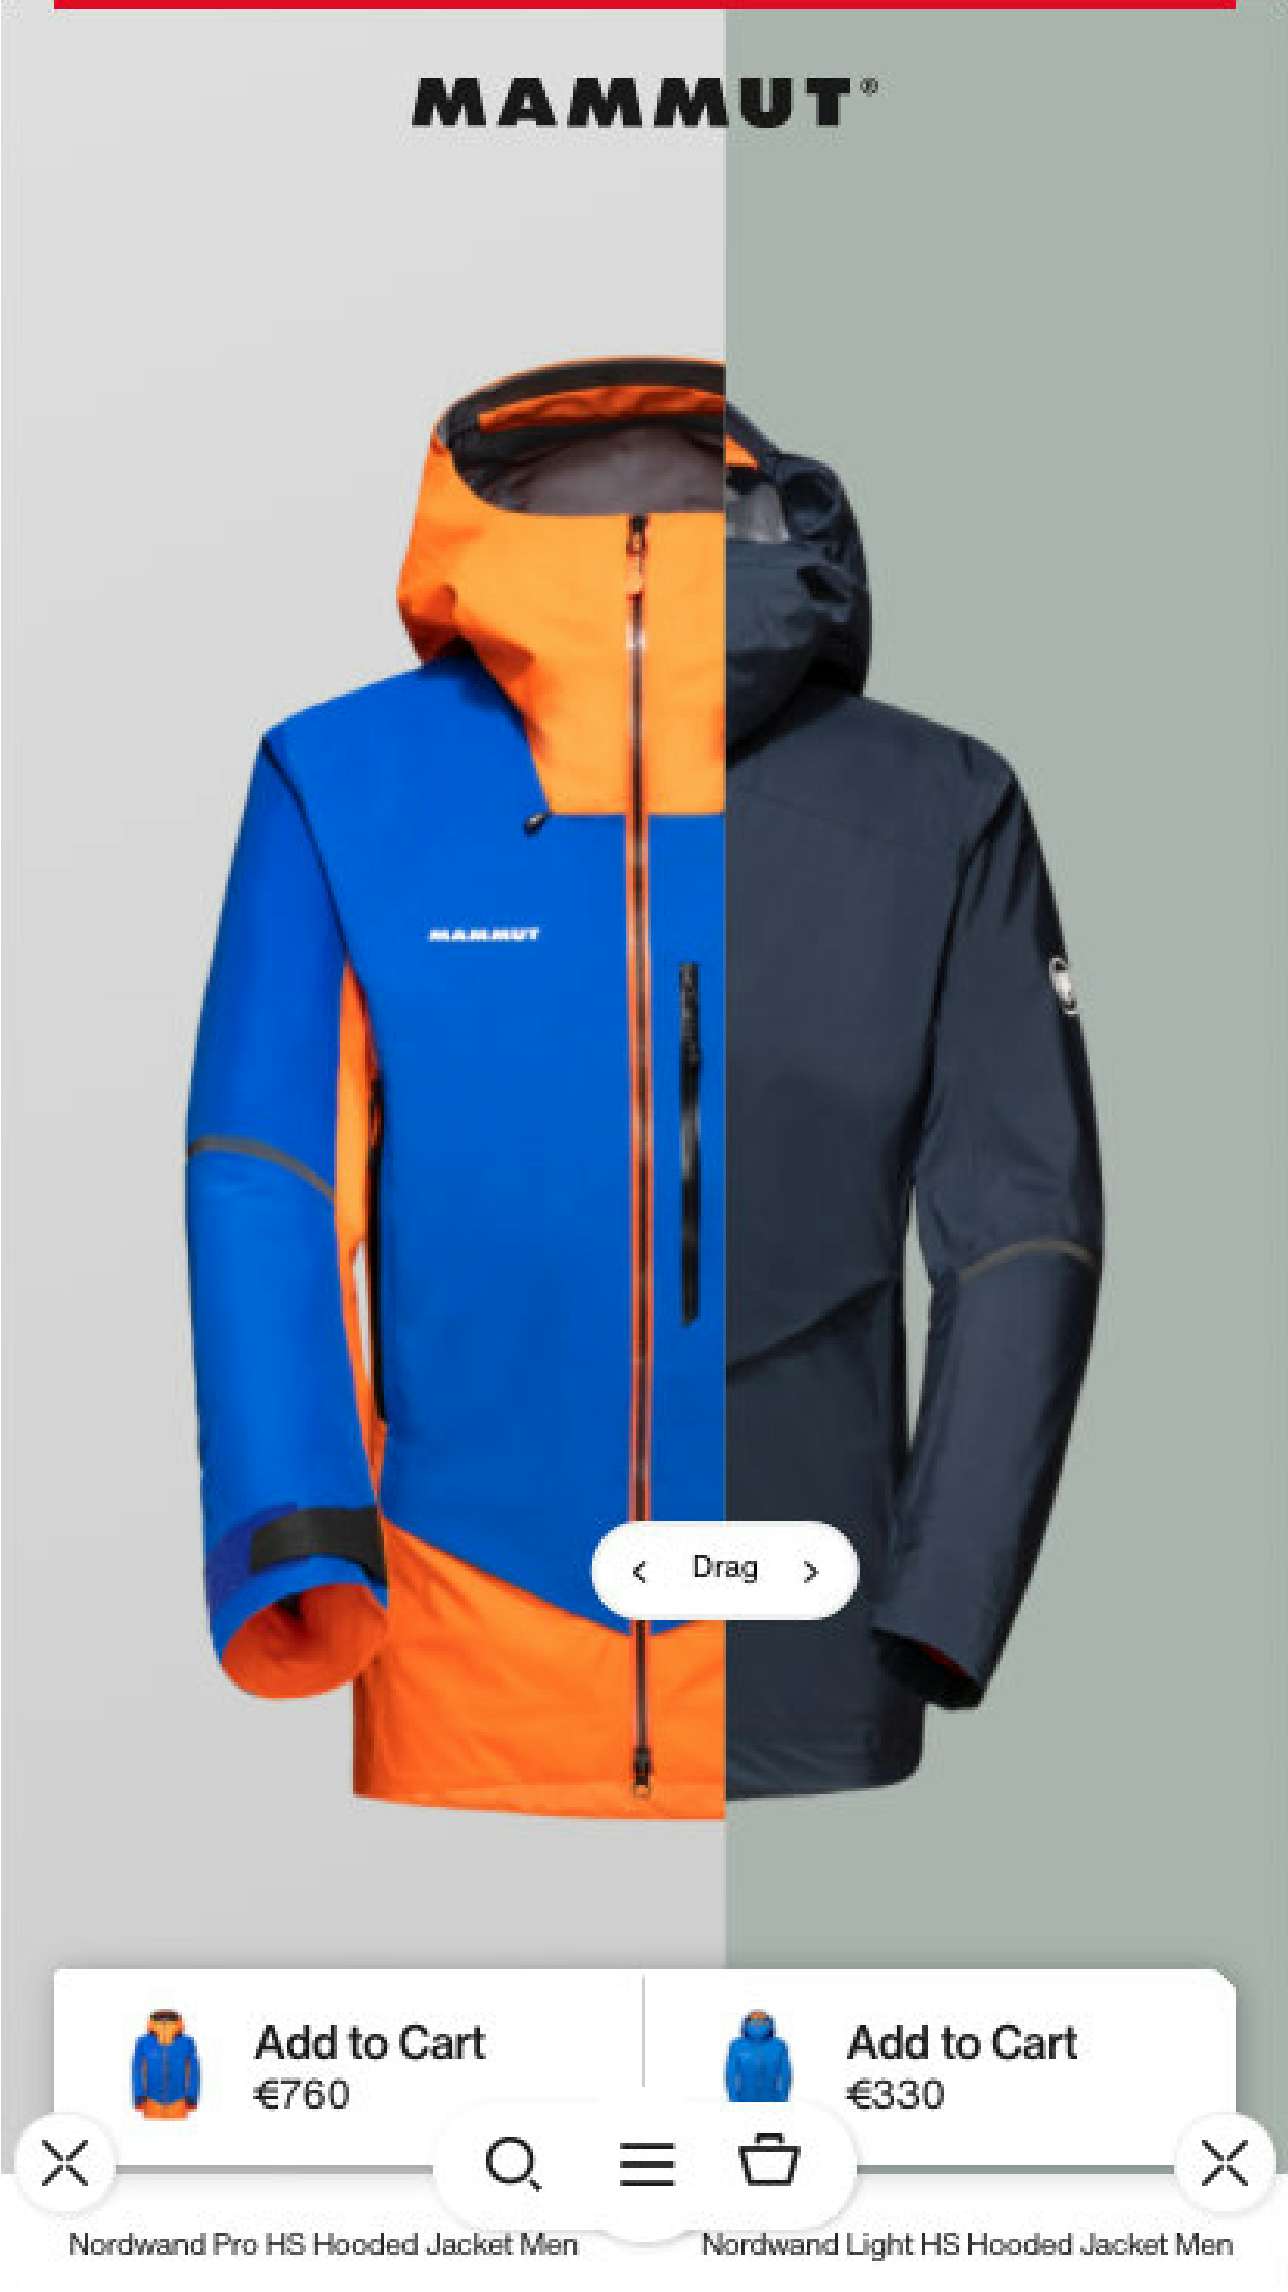 Compare tool showing two jackets